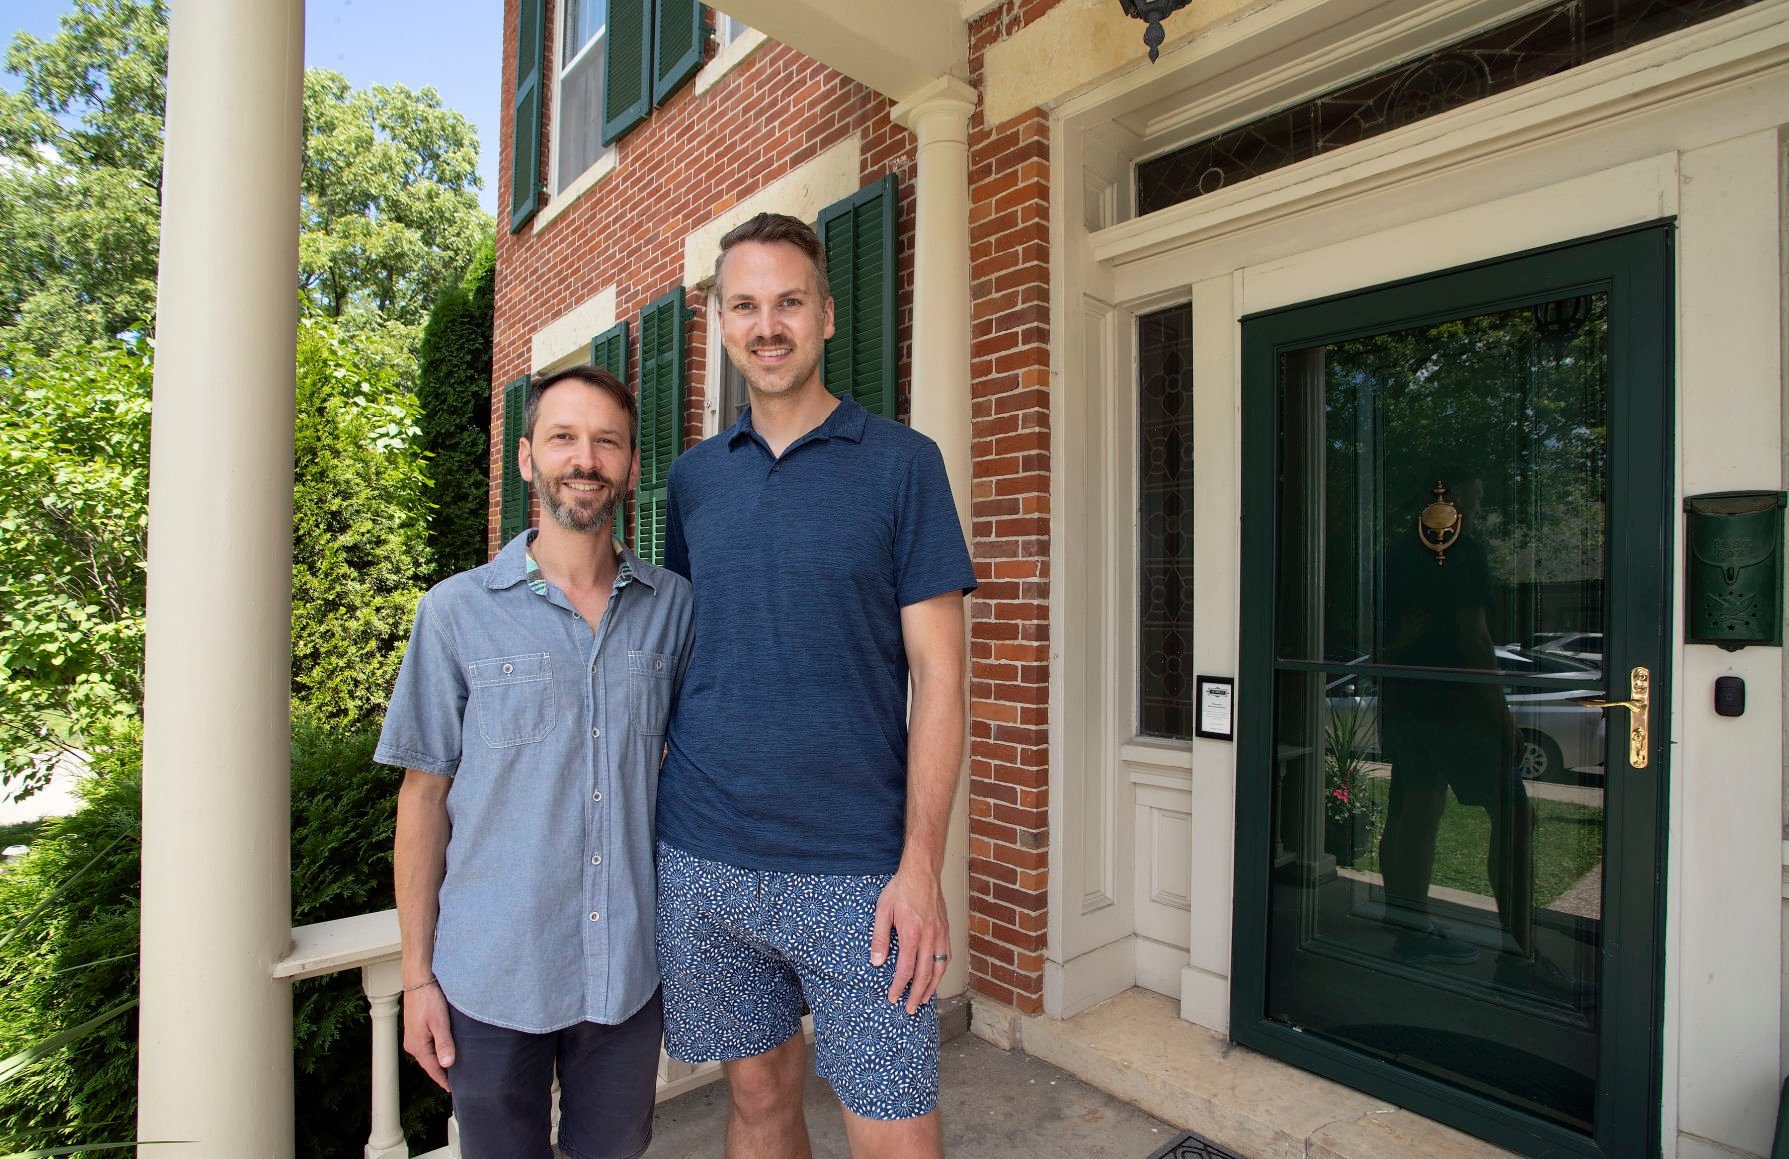 Innkeepers Robert (left) and Douglas Mahan operate Aldrich Guest House in Galena, Ill. They have been at the historic site for eight years. It won the TripAdvisor Traveler’s Choice 2022 “Best of the Best” award.    PHOTO CREDIT: Stephen Gassman